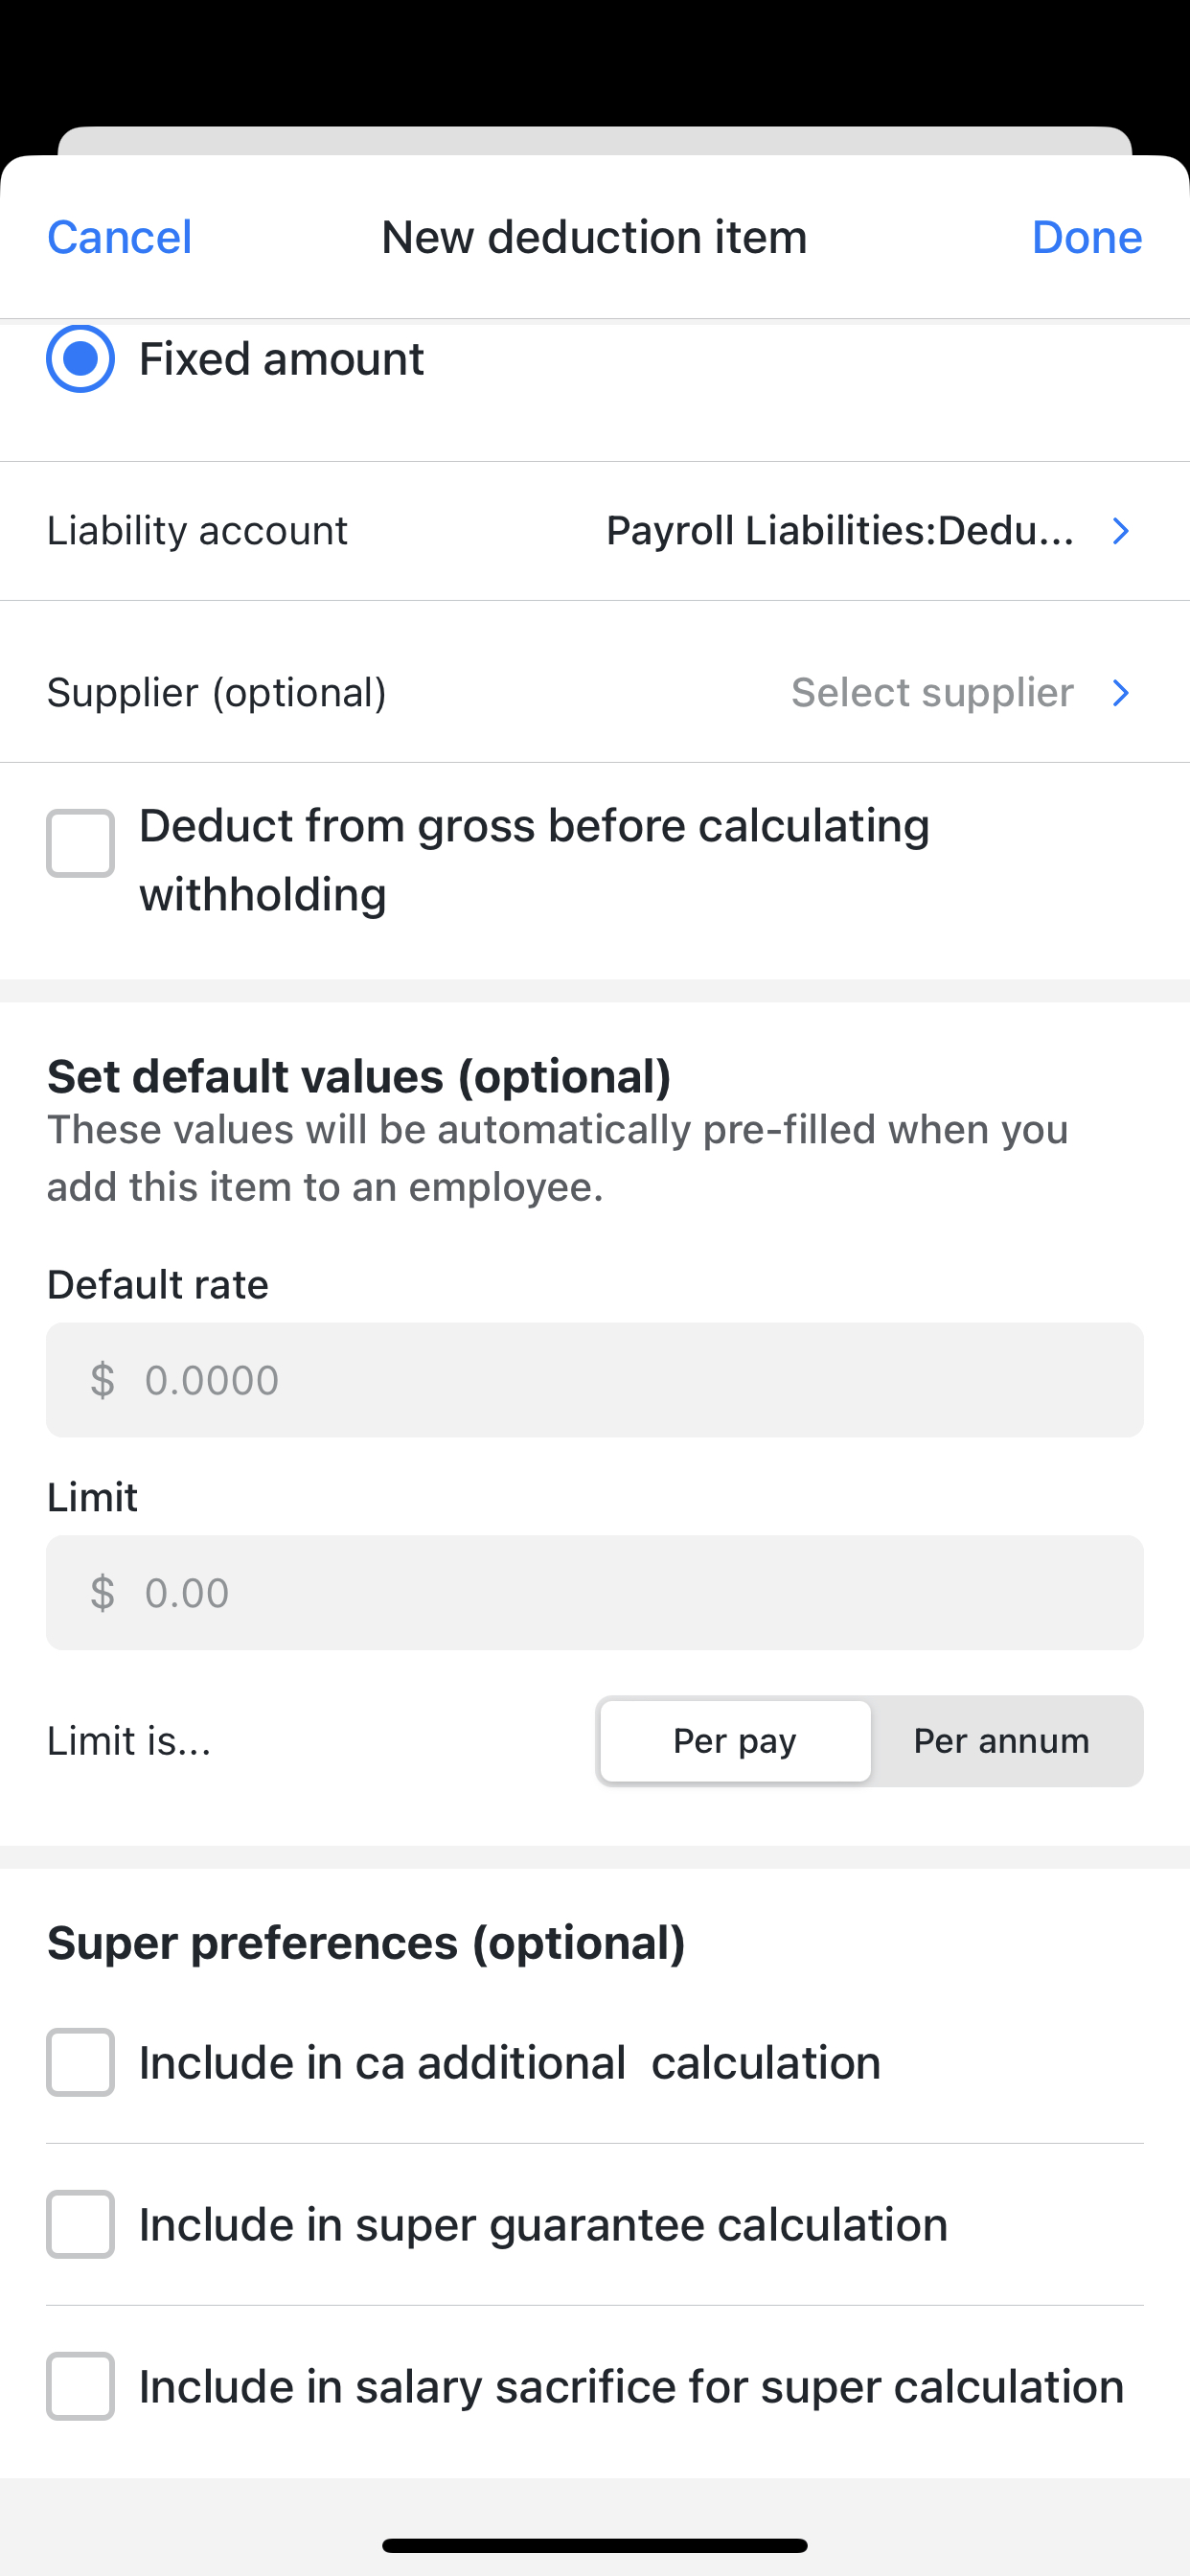 New deduction item - additional fields